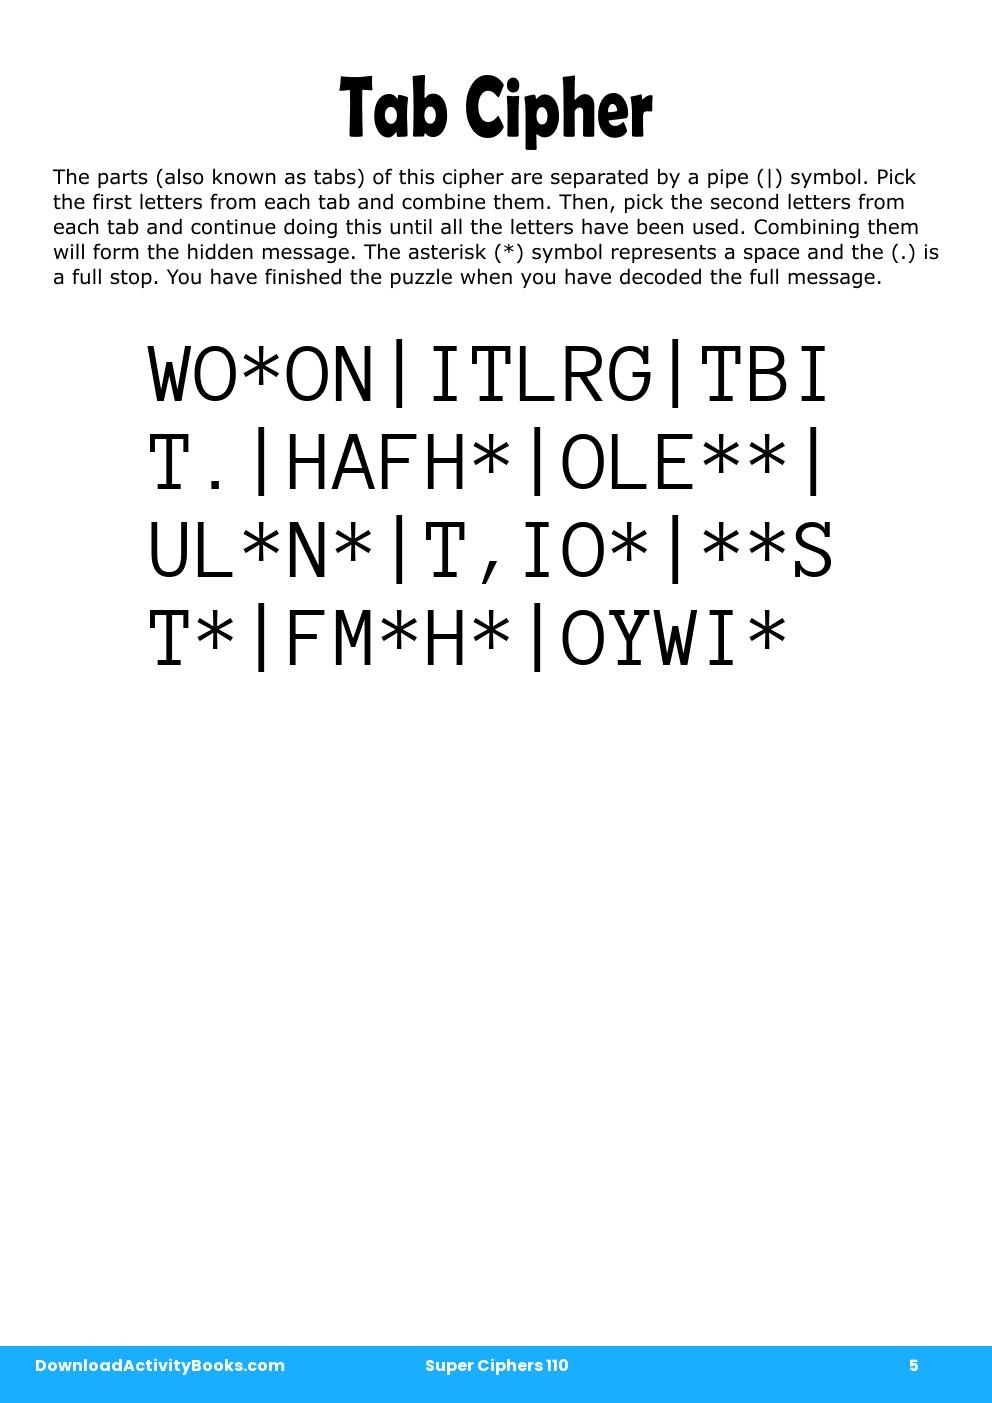 Tab Cipher in Super Ciphers 110